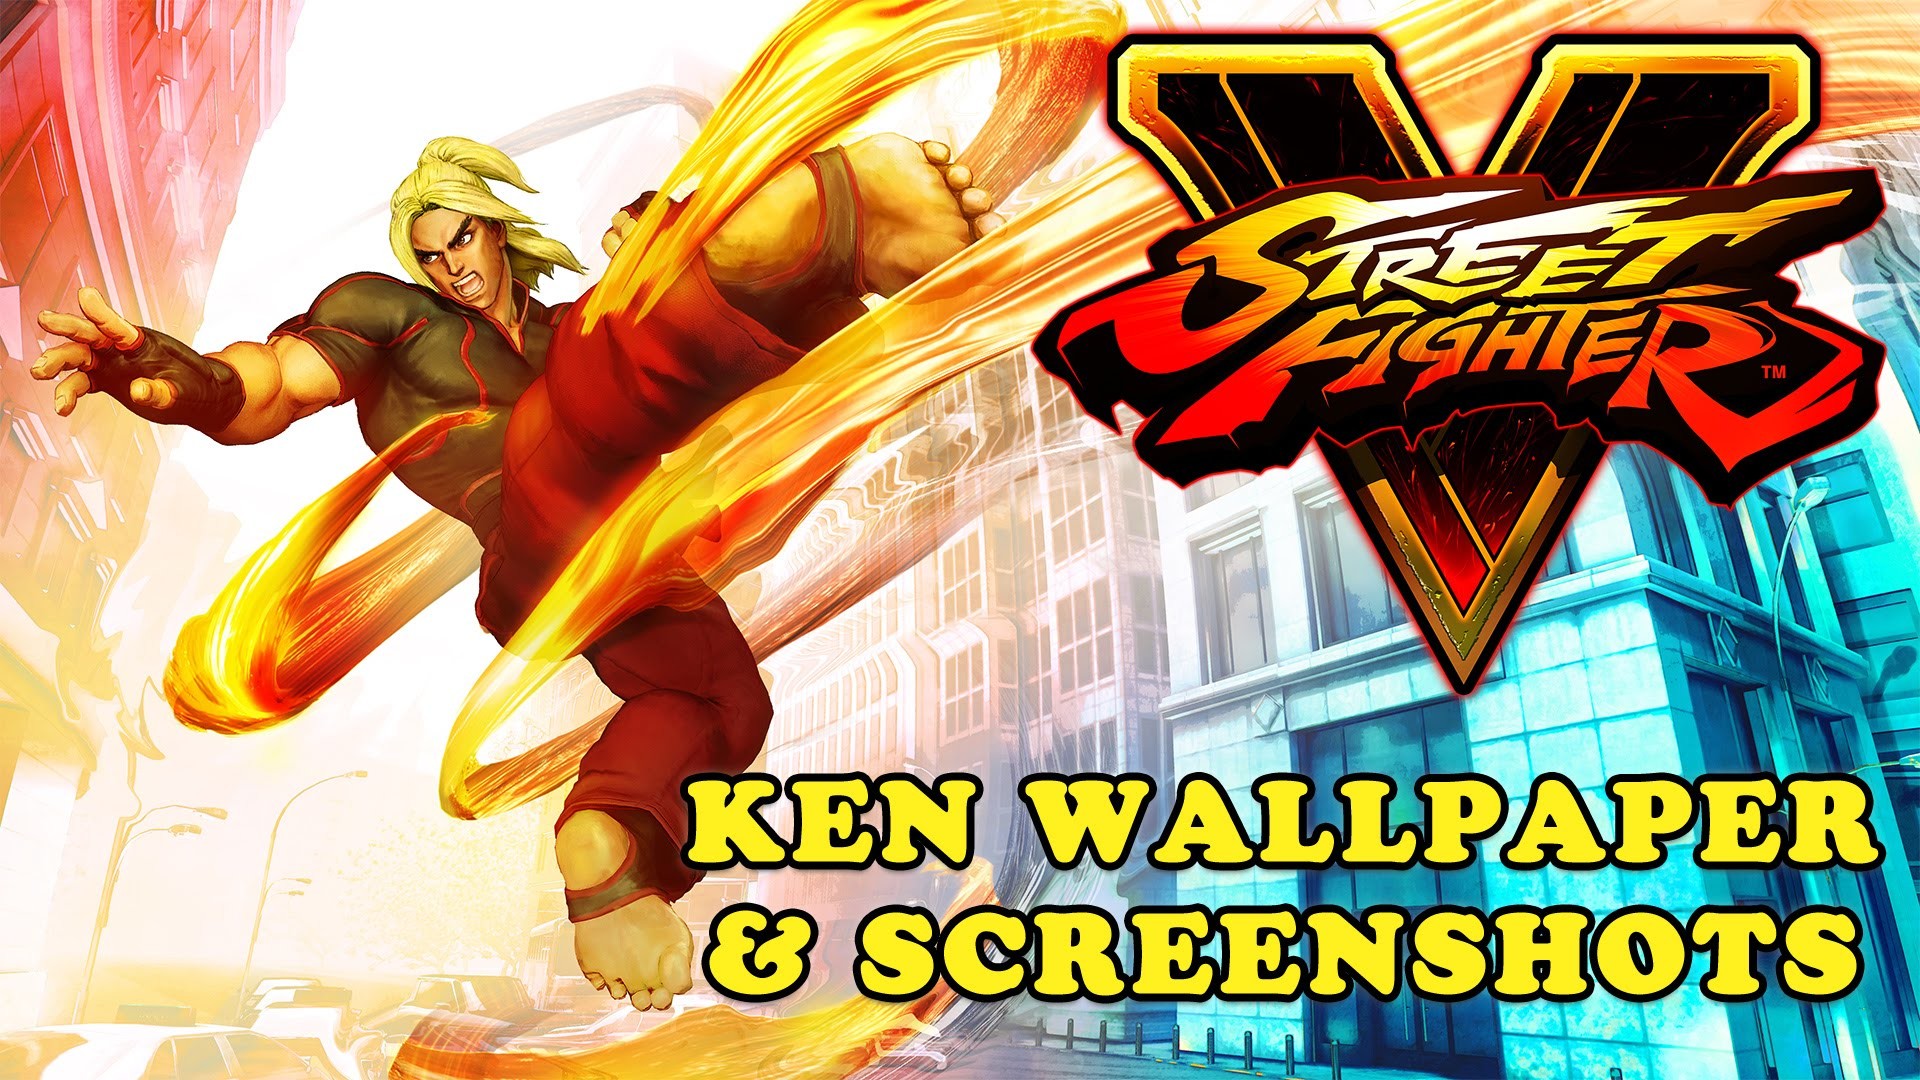 1920x1080 ... 68 entries in Street Fighter HD Wallpapers group ...